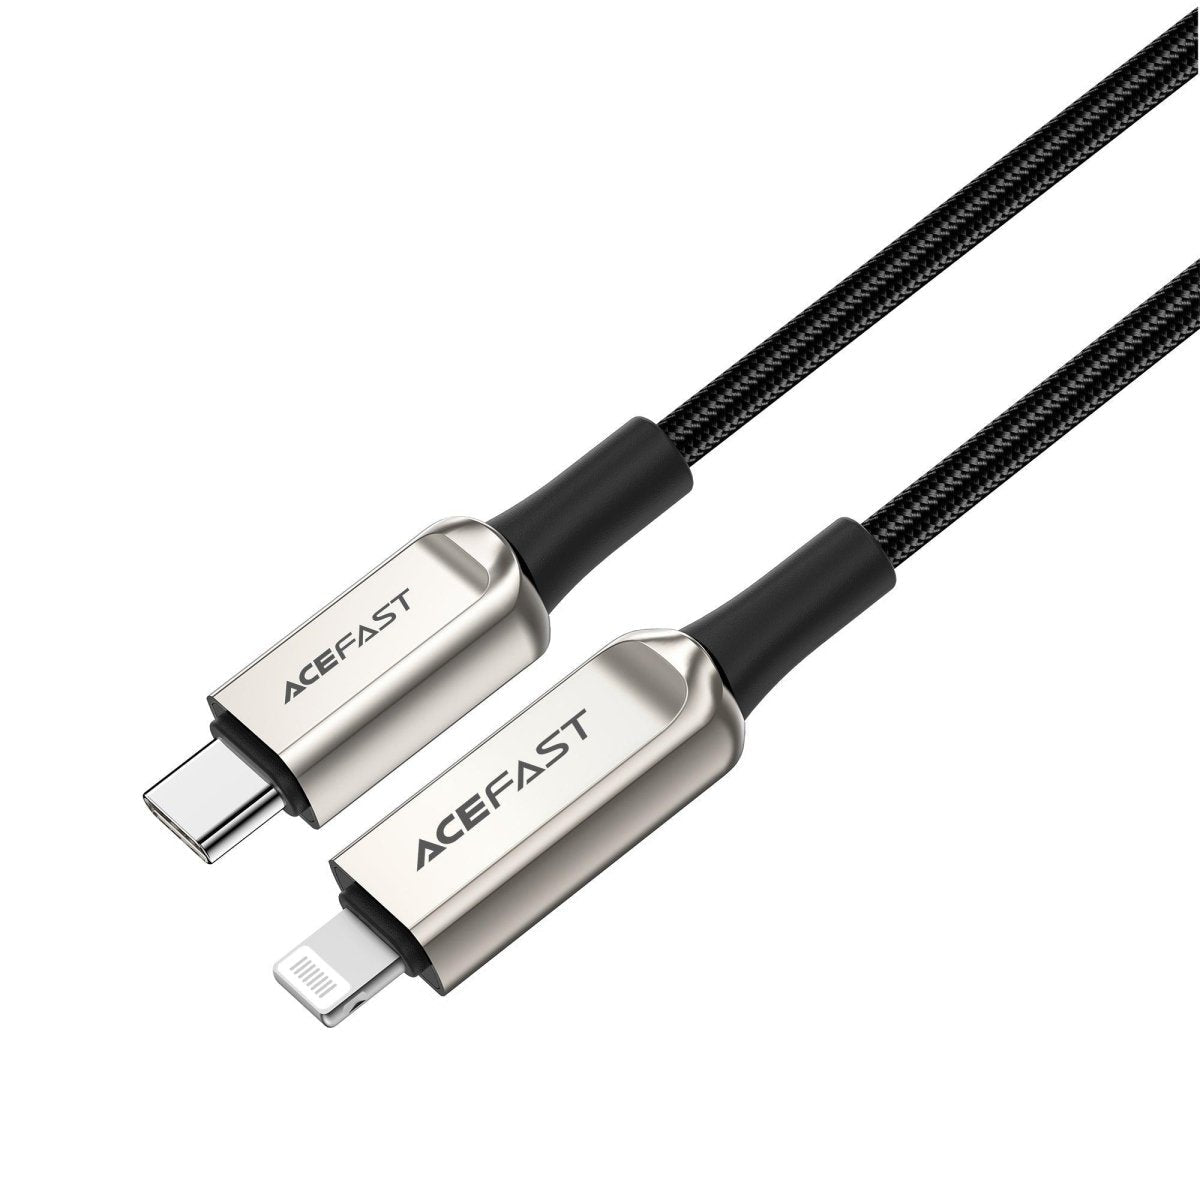 C6 01 SilverACEFASTACEFAST PD20W MFi USB C To Lightning Cable C6 01 - ACEFASTC6 01 Silver